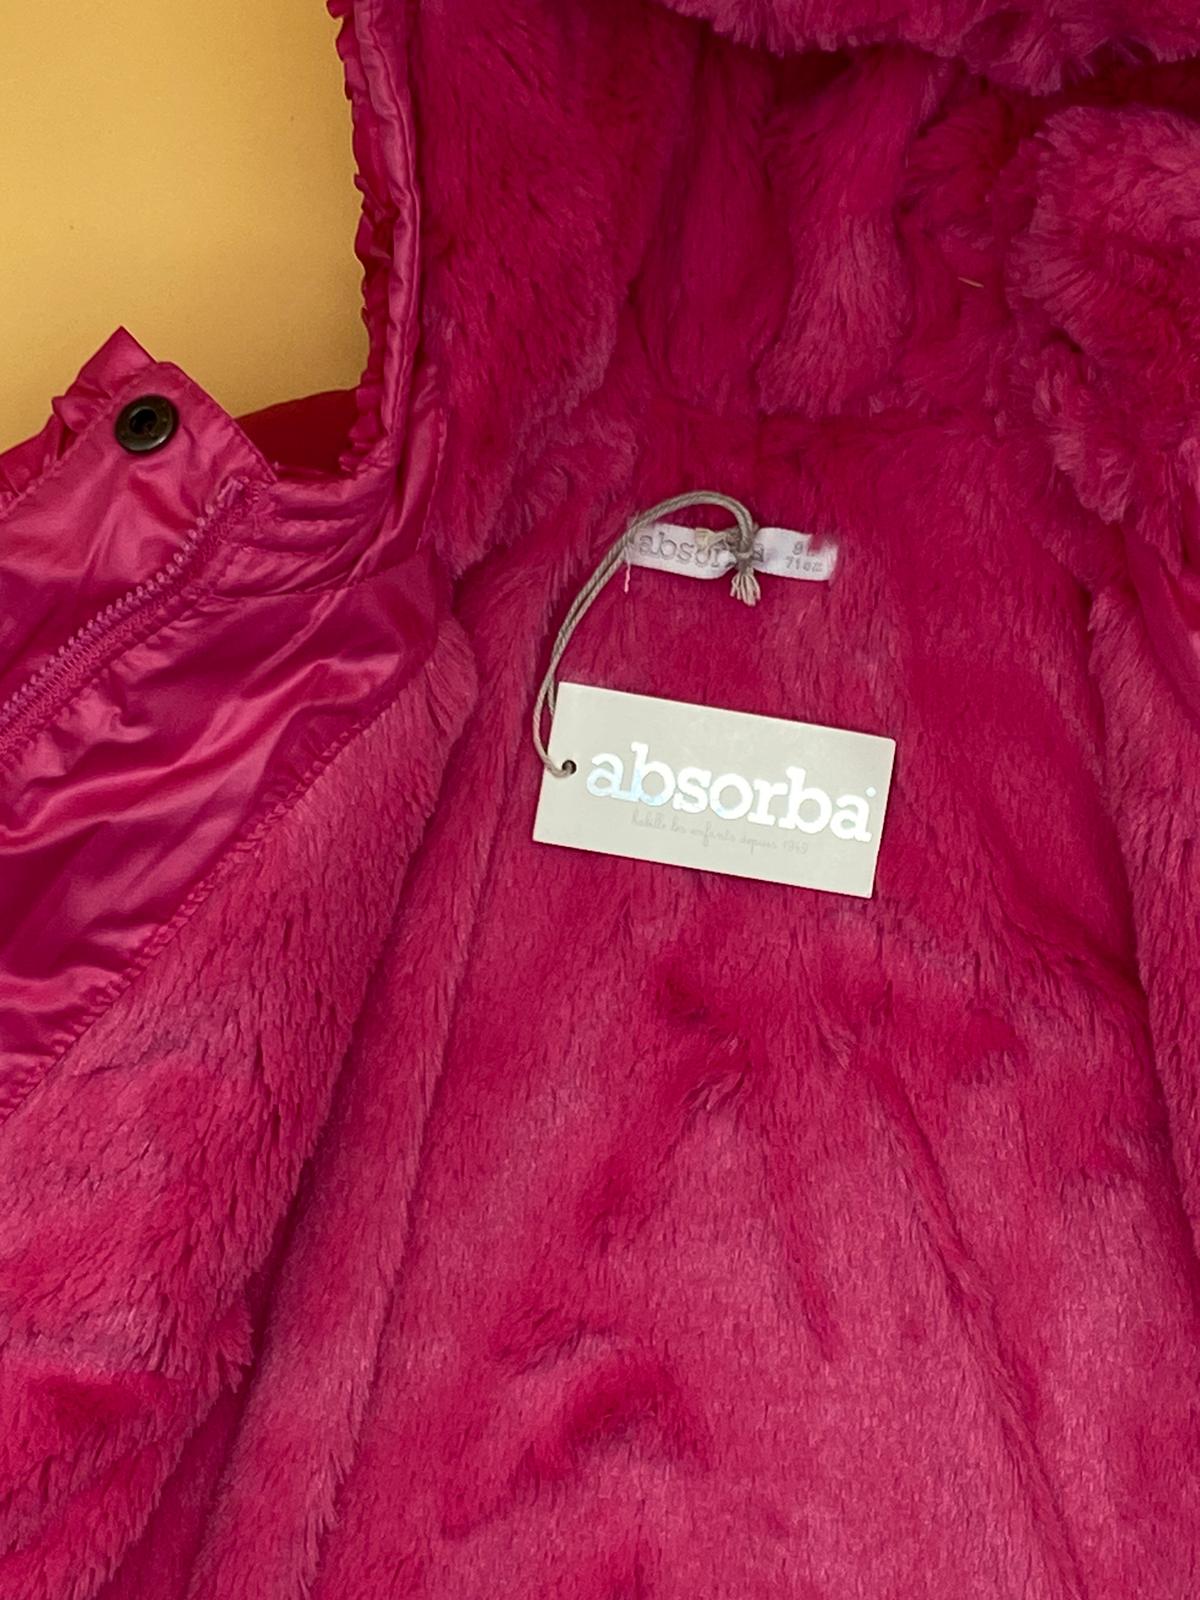 ABSORBA jacket with gloves